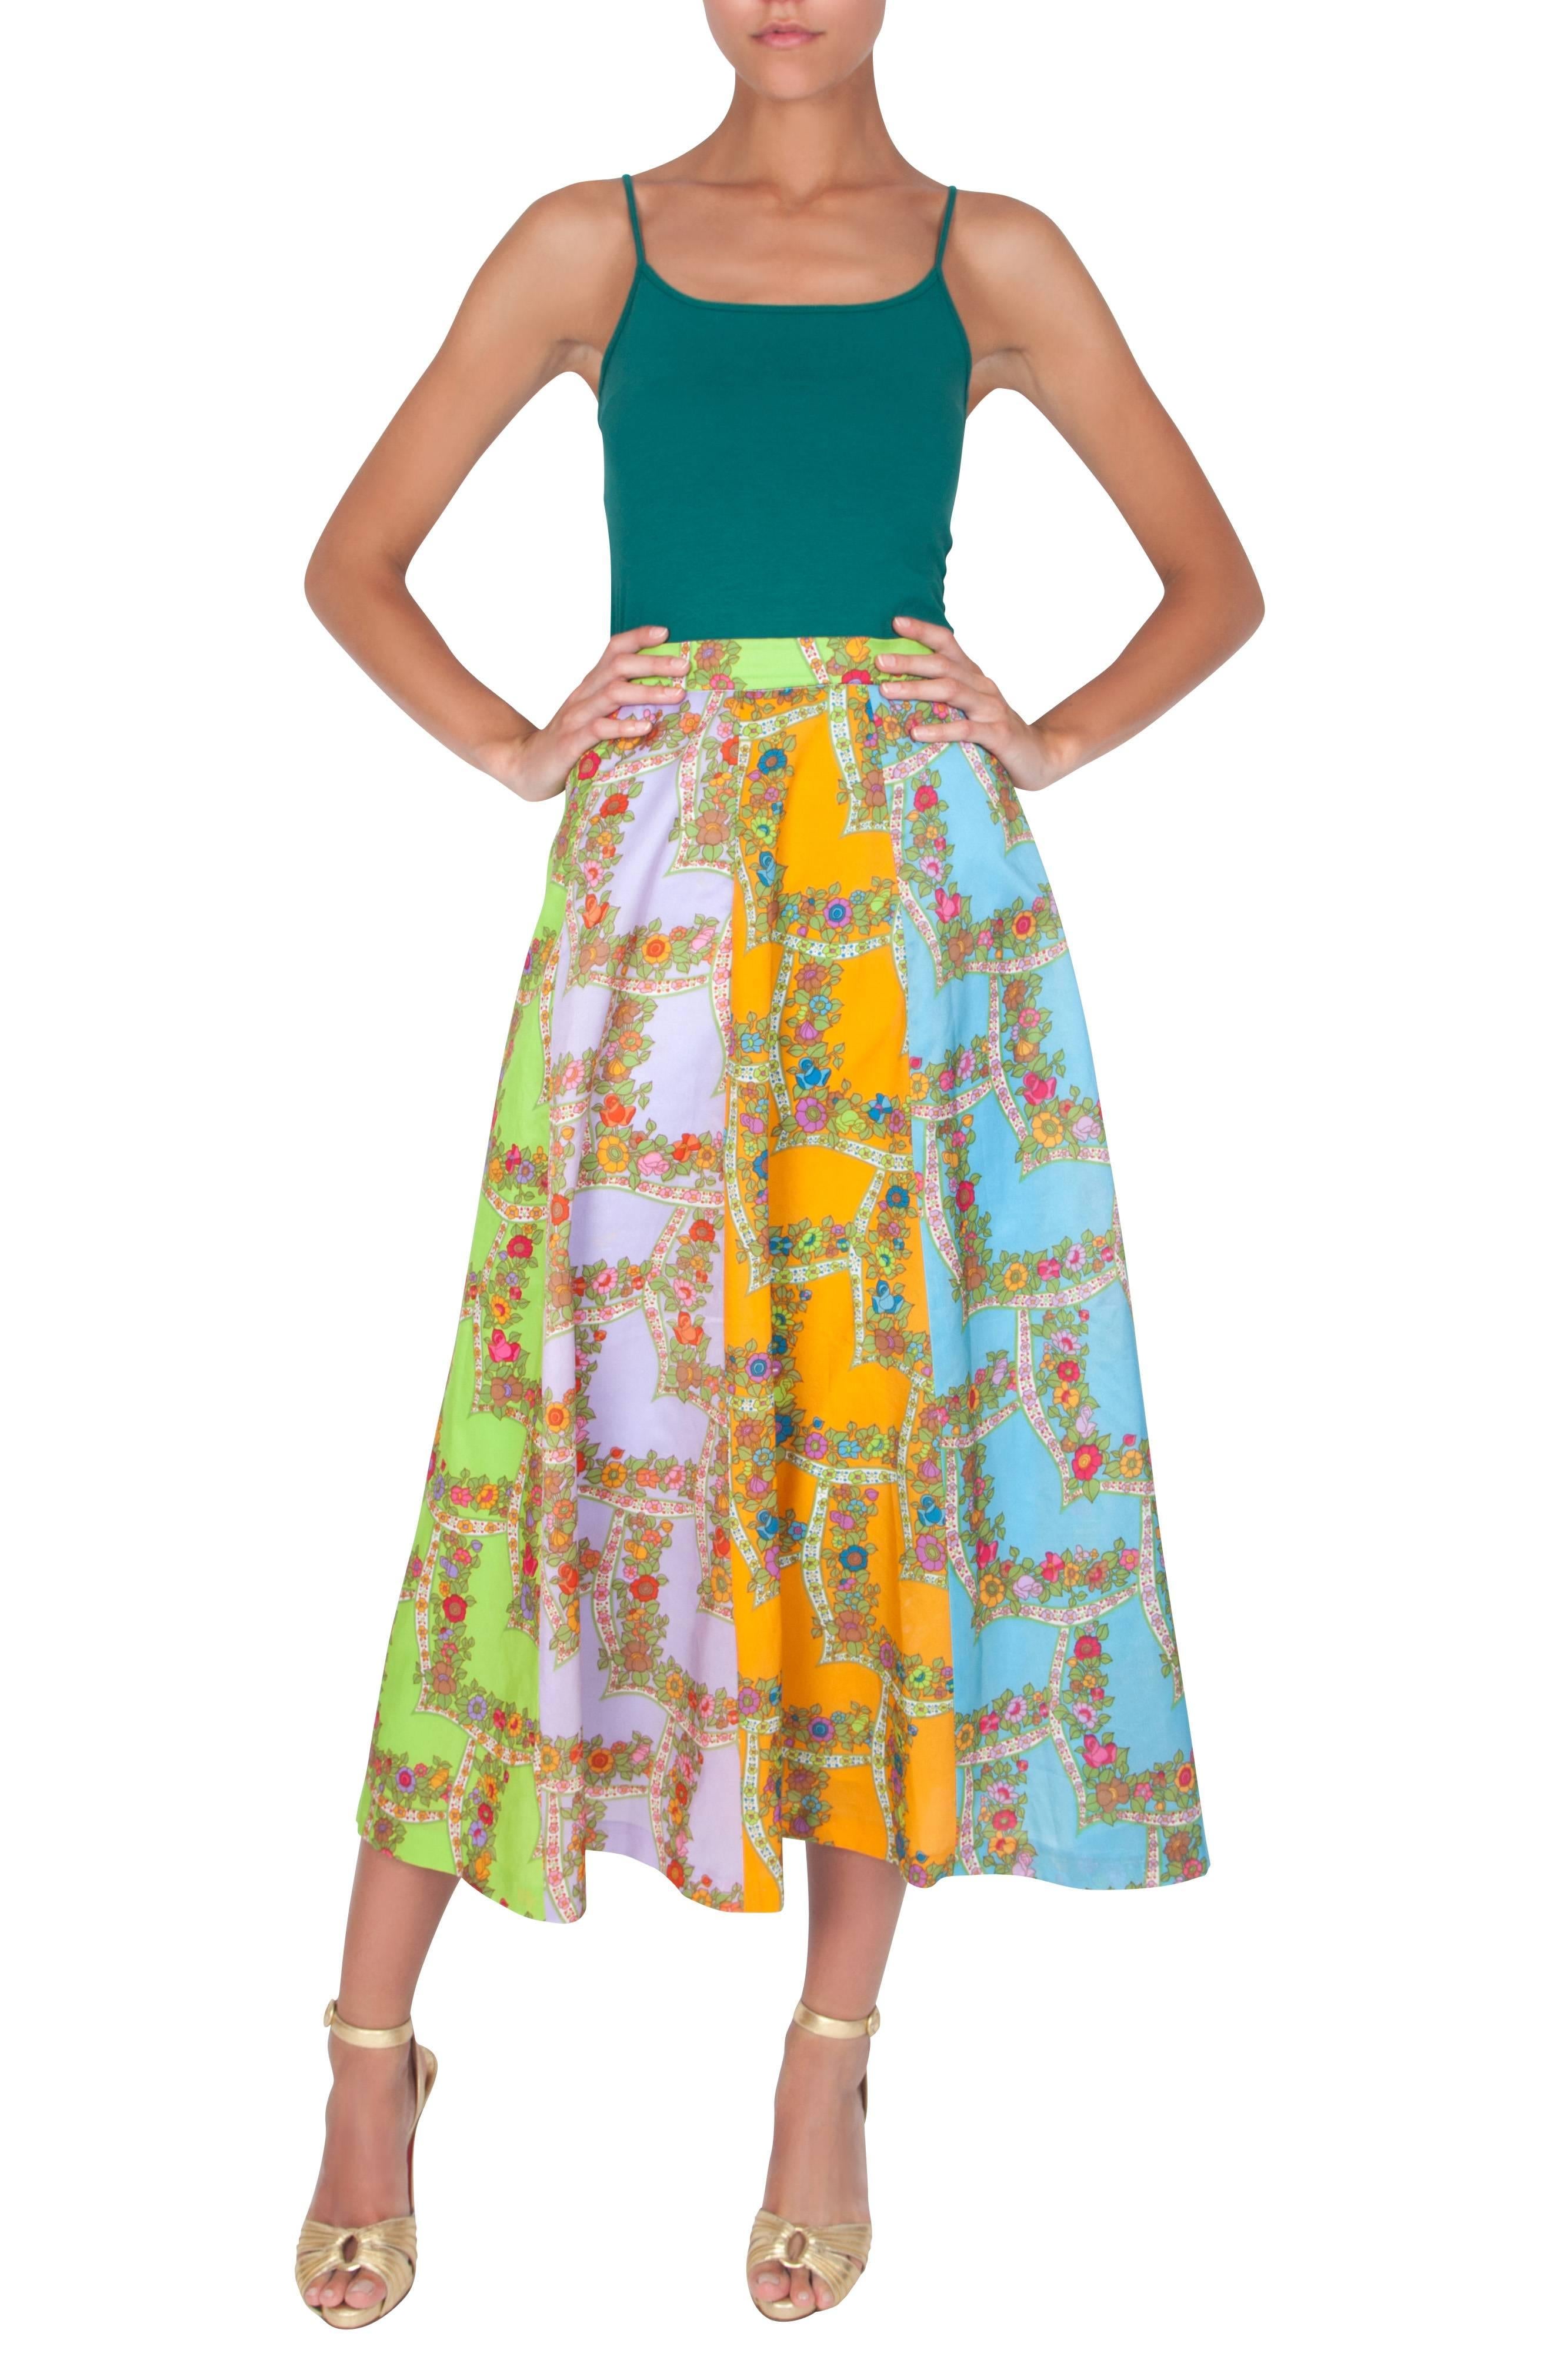 1970s bright and colourful flowy circle skirt with floral grid pattern. Made from a lightweight silky polyester, this midi length skirt has a back hook and snap closure, and a breathable synthetic lining.  A Belinda Bellville design, however, the